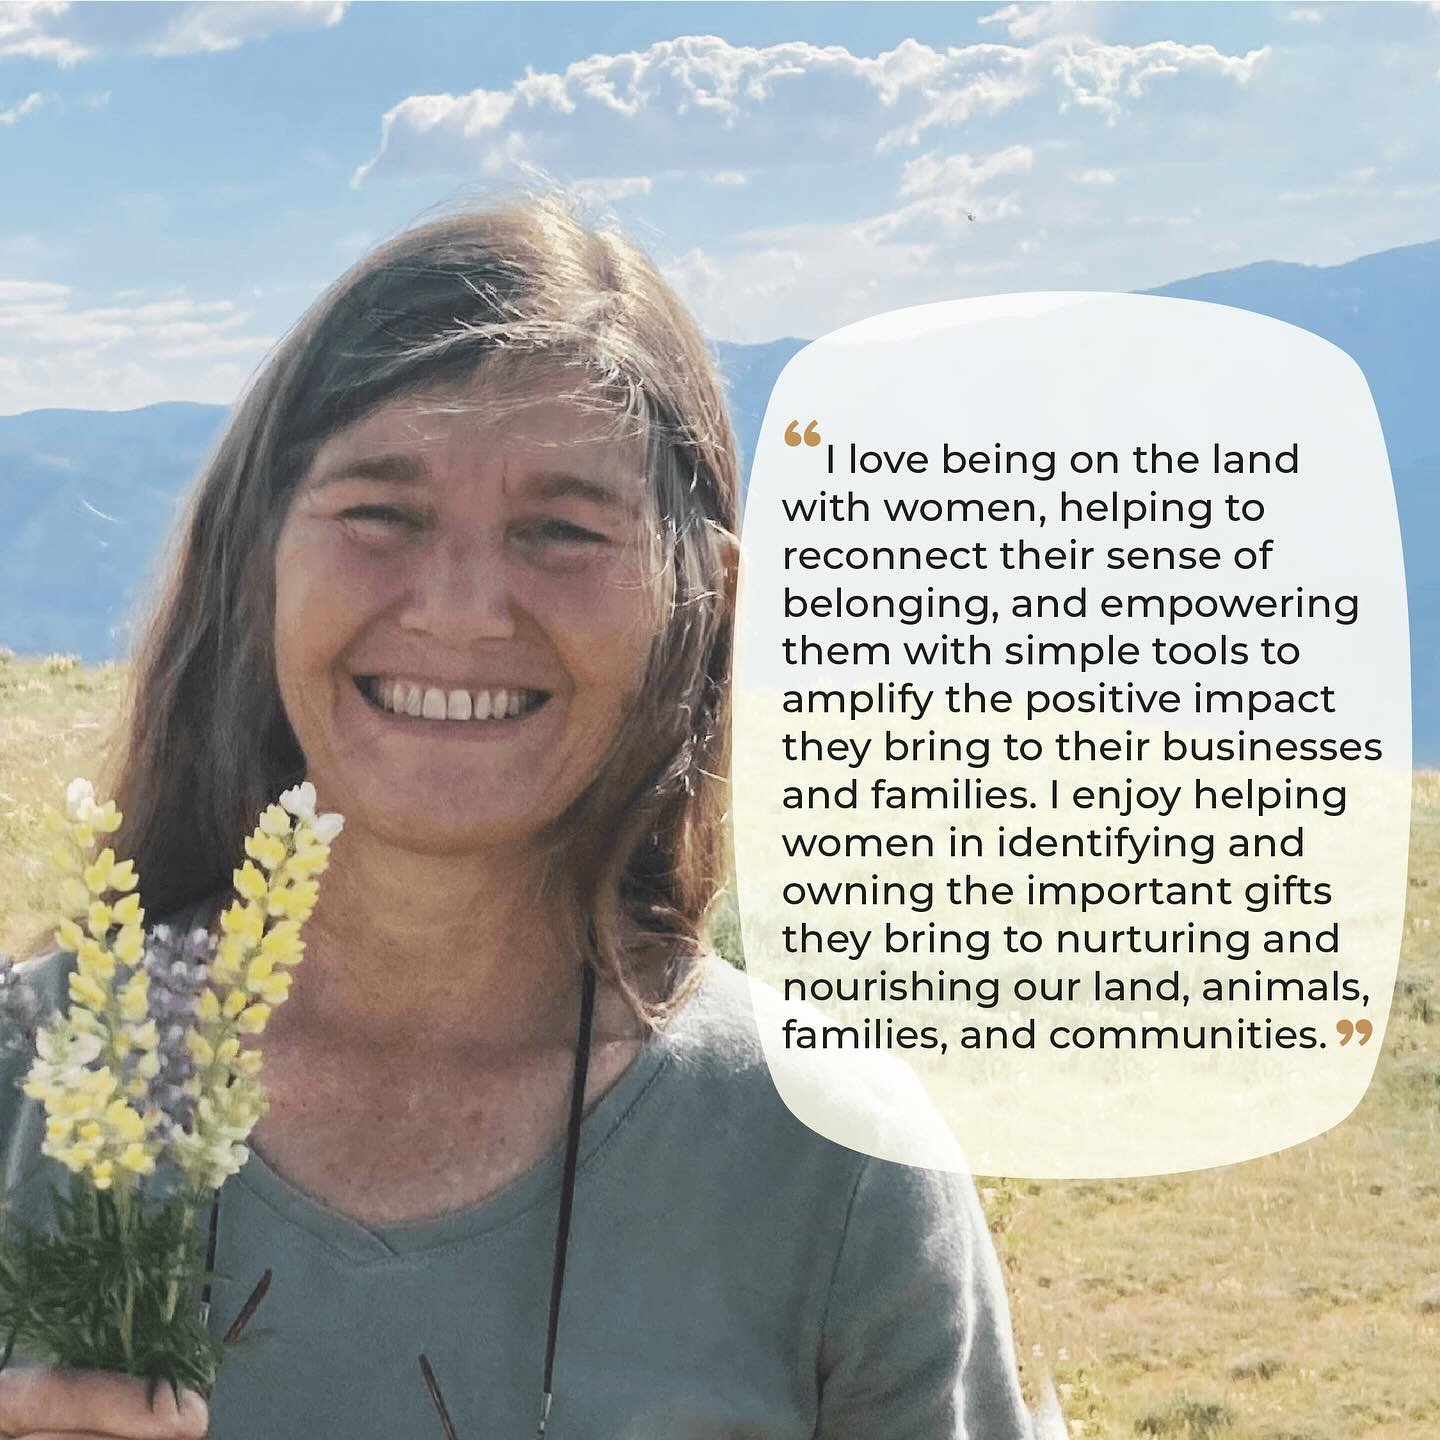 Join us TODAY at noon MST for an exciting IG live session featuring Kathy Frisch! 🌟

Outside of WIR, Kathy&rsquo;s focus is raising nutrient dense food on her own place in Texas and consulting with ranch families/managers in the tools of Holistic Ma